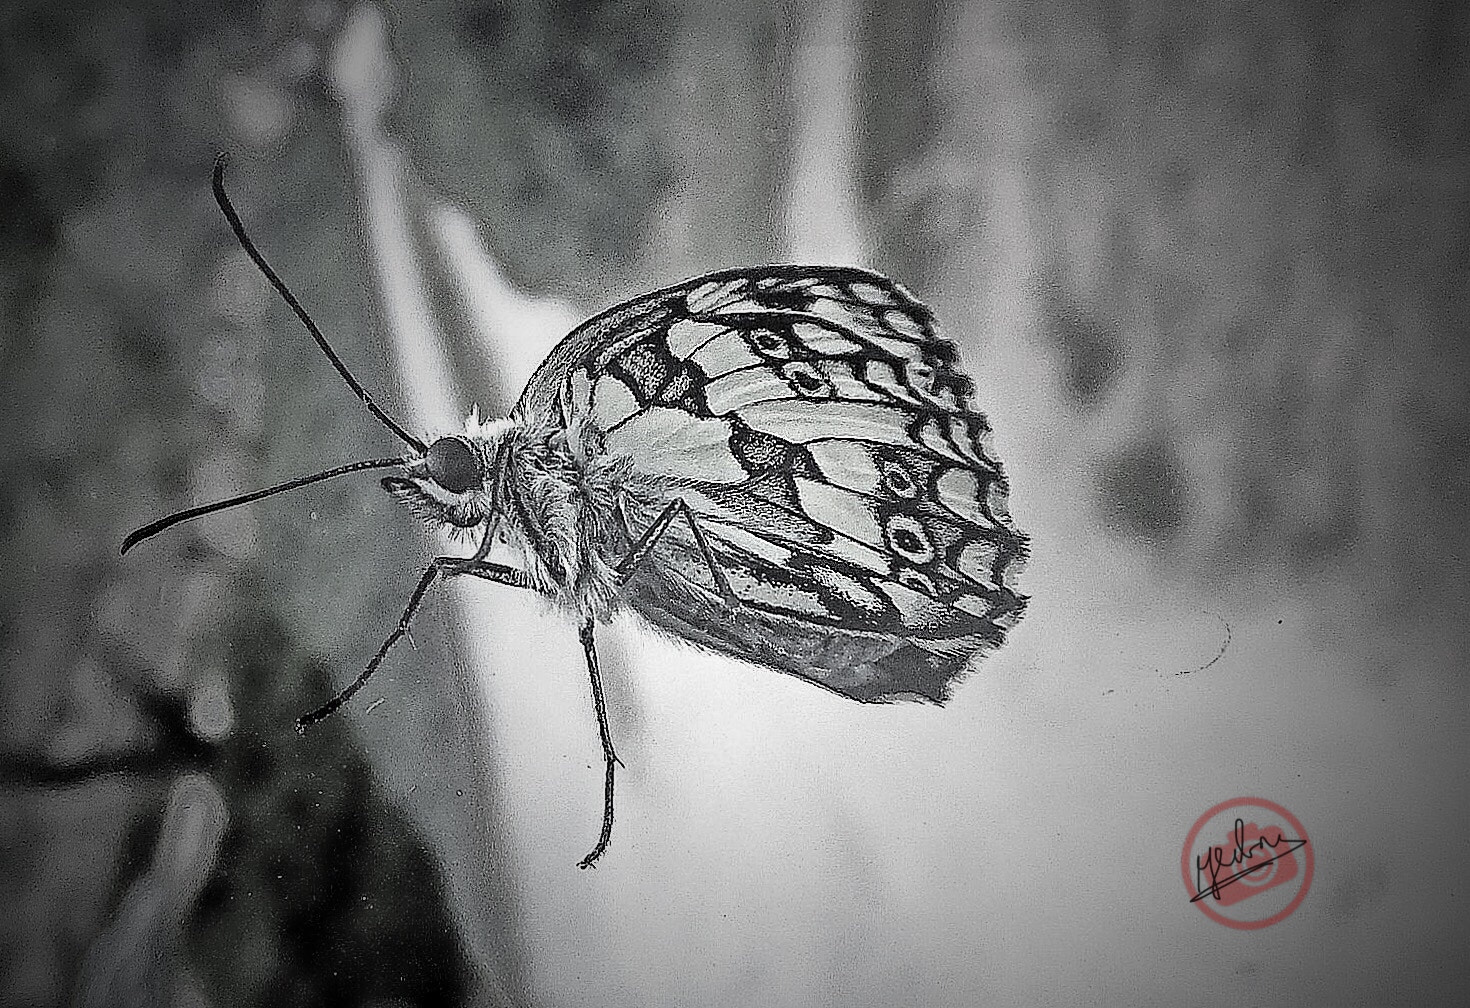 Fujifilm FinePix F550EXR sample photo. A butterfly on the glass photography